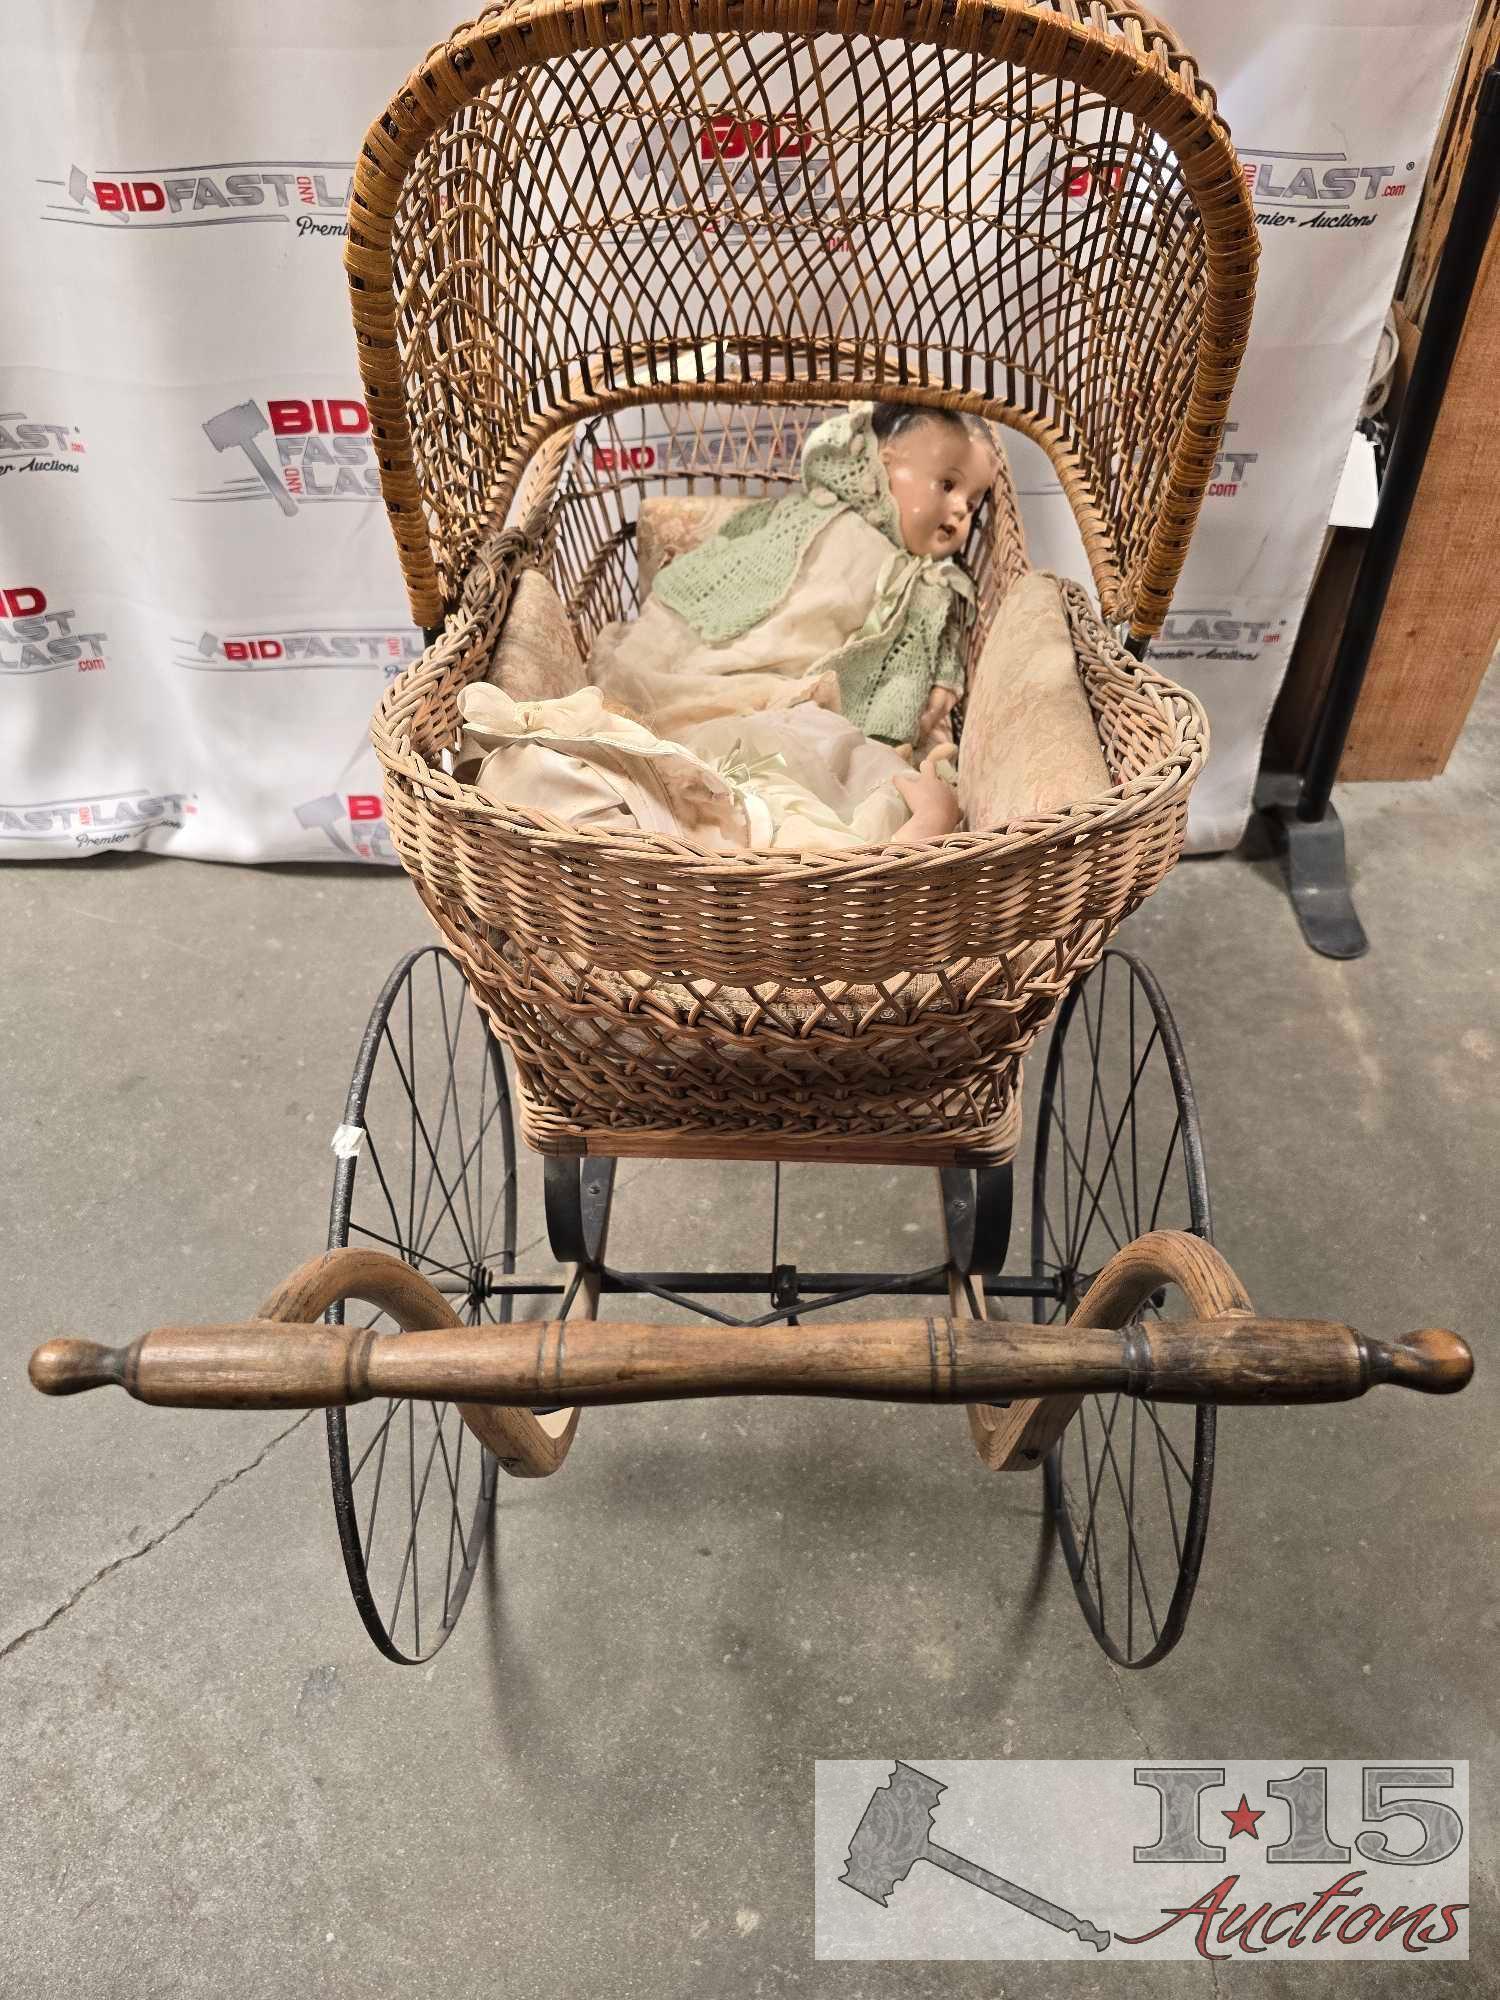 Vintage Baby Carriage with (2) Porcelain Dolls